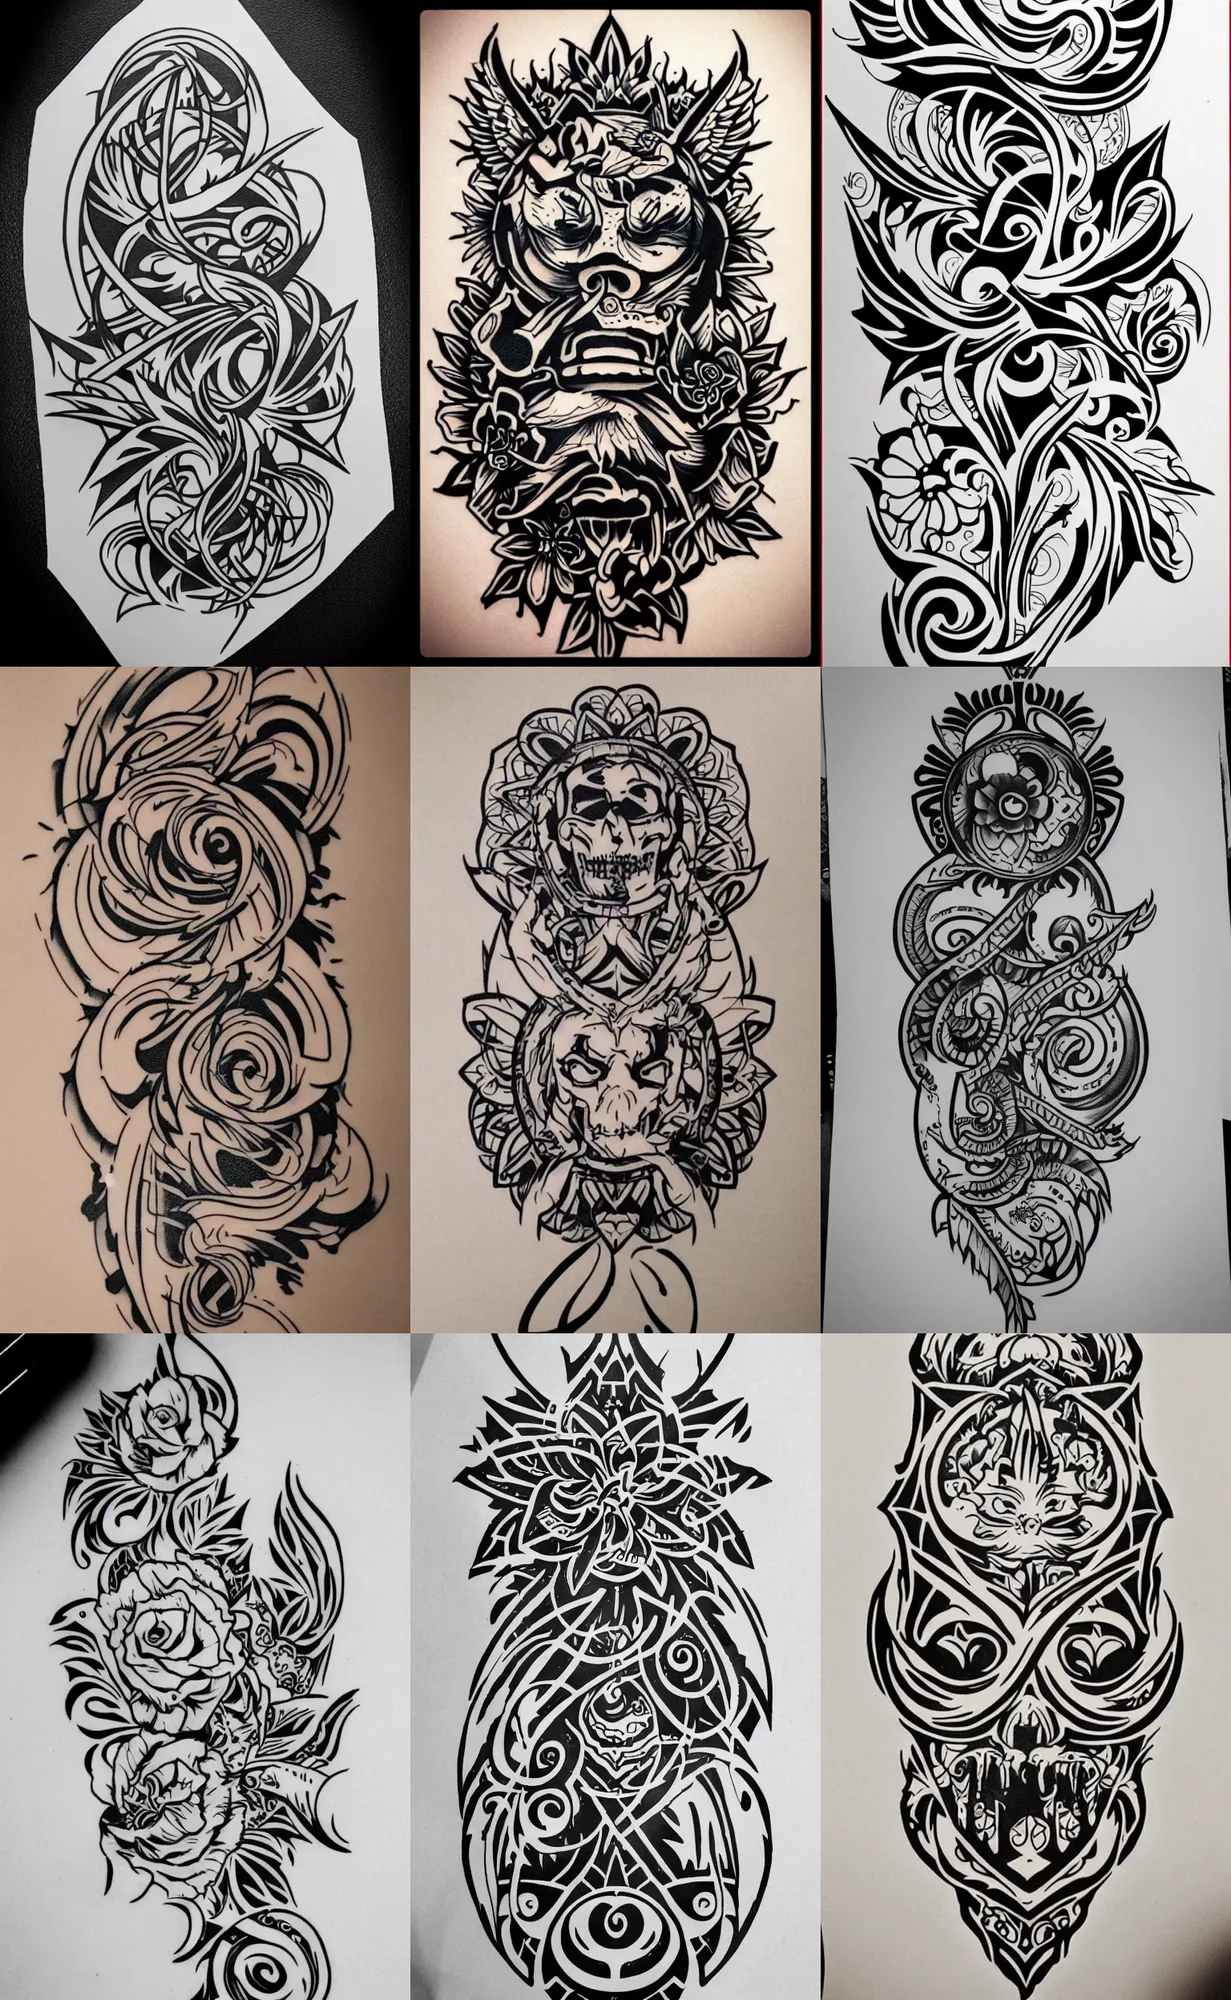 Details more than 75 east side tattoo designs  ineteachers